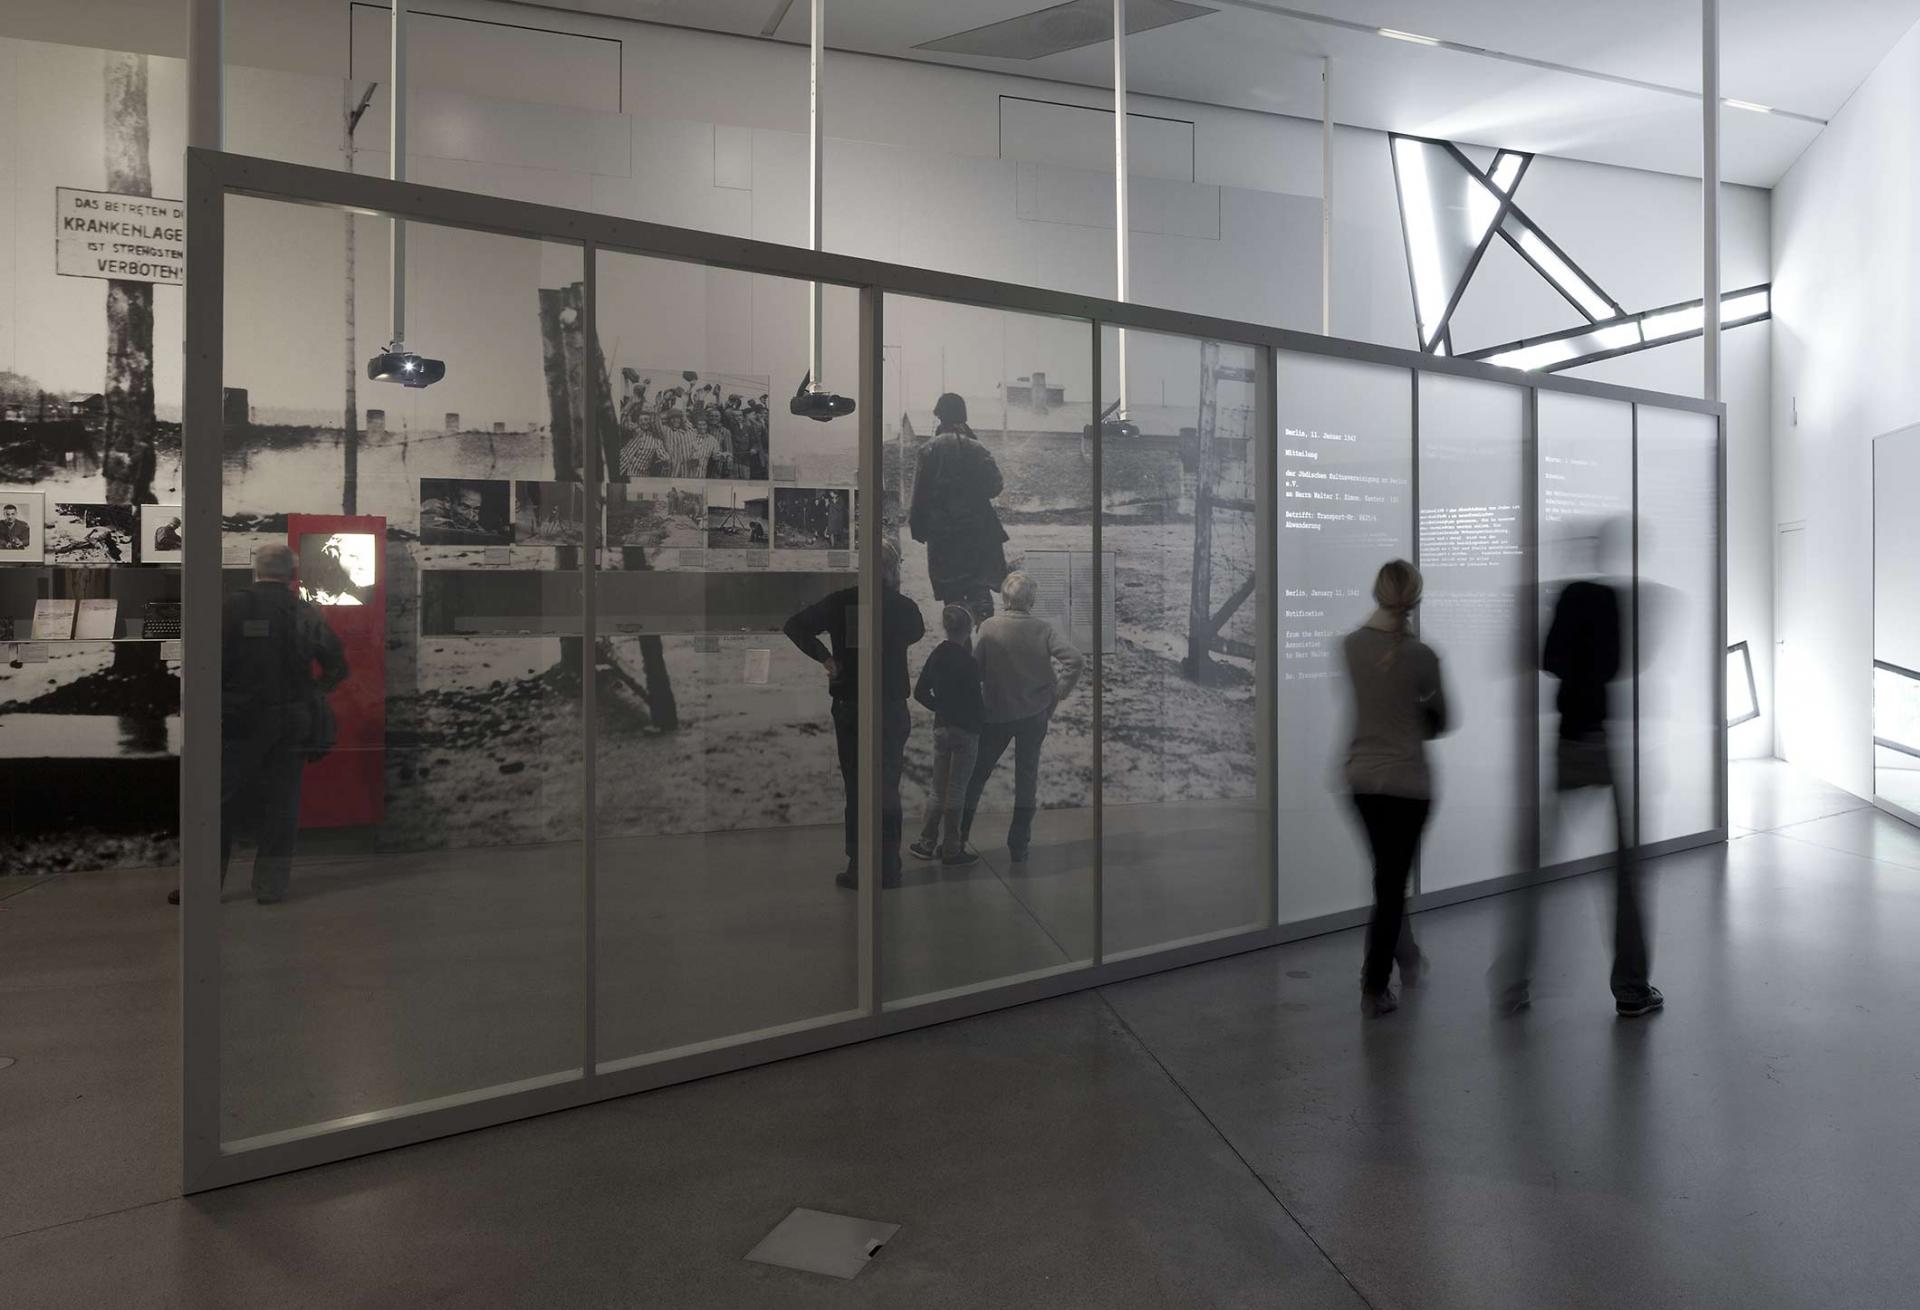 Visitors walk by in a blur while reading text on a wall in the permanent exhibition